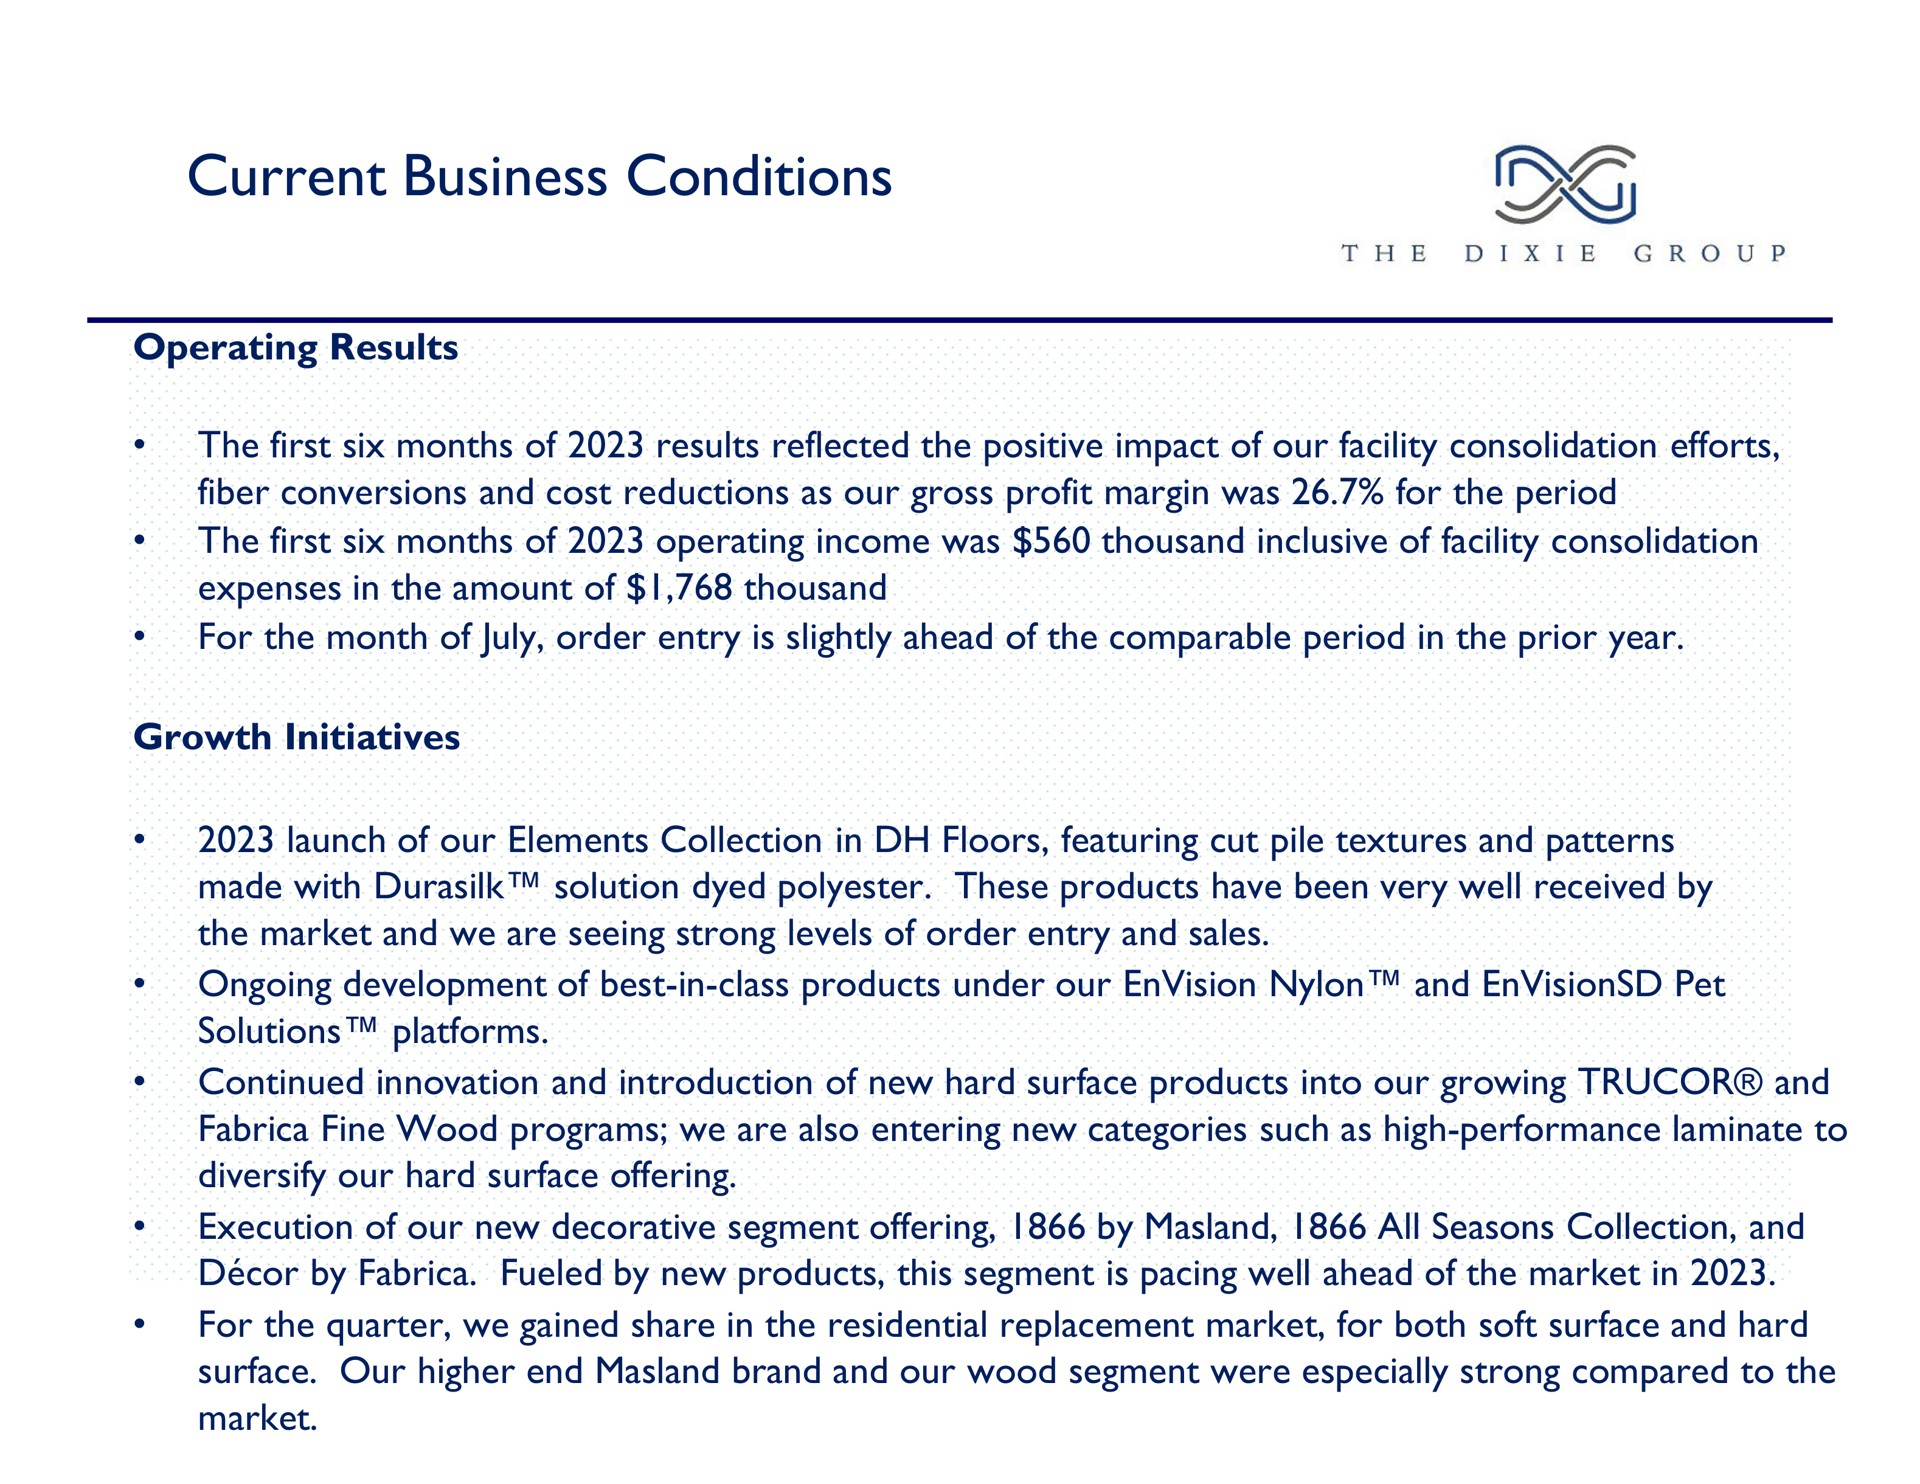 current business conditions | The Dixie Group